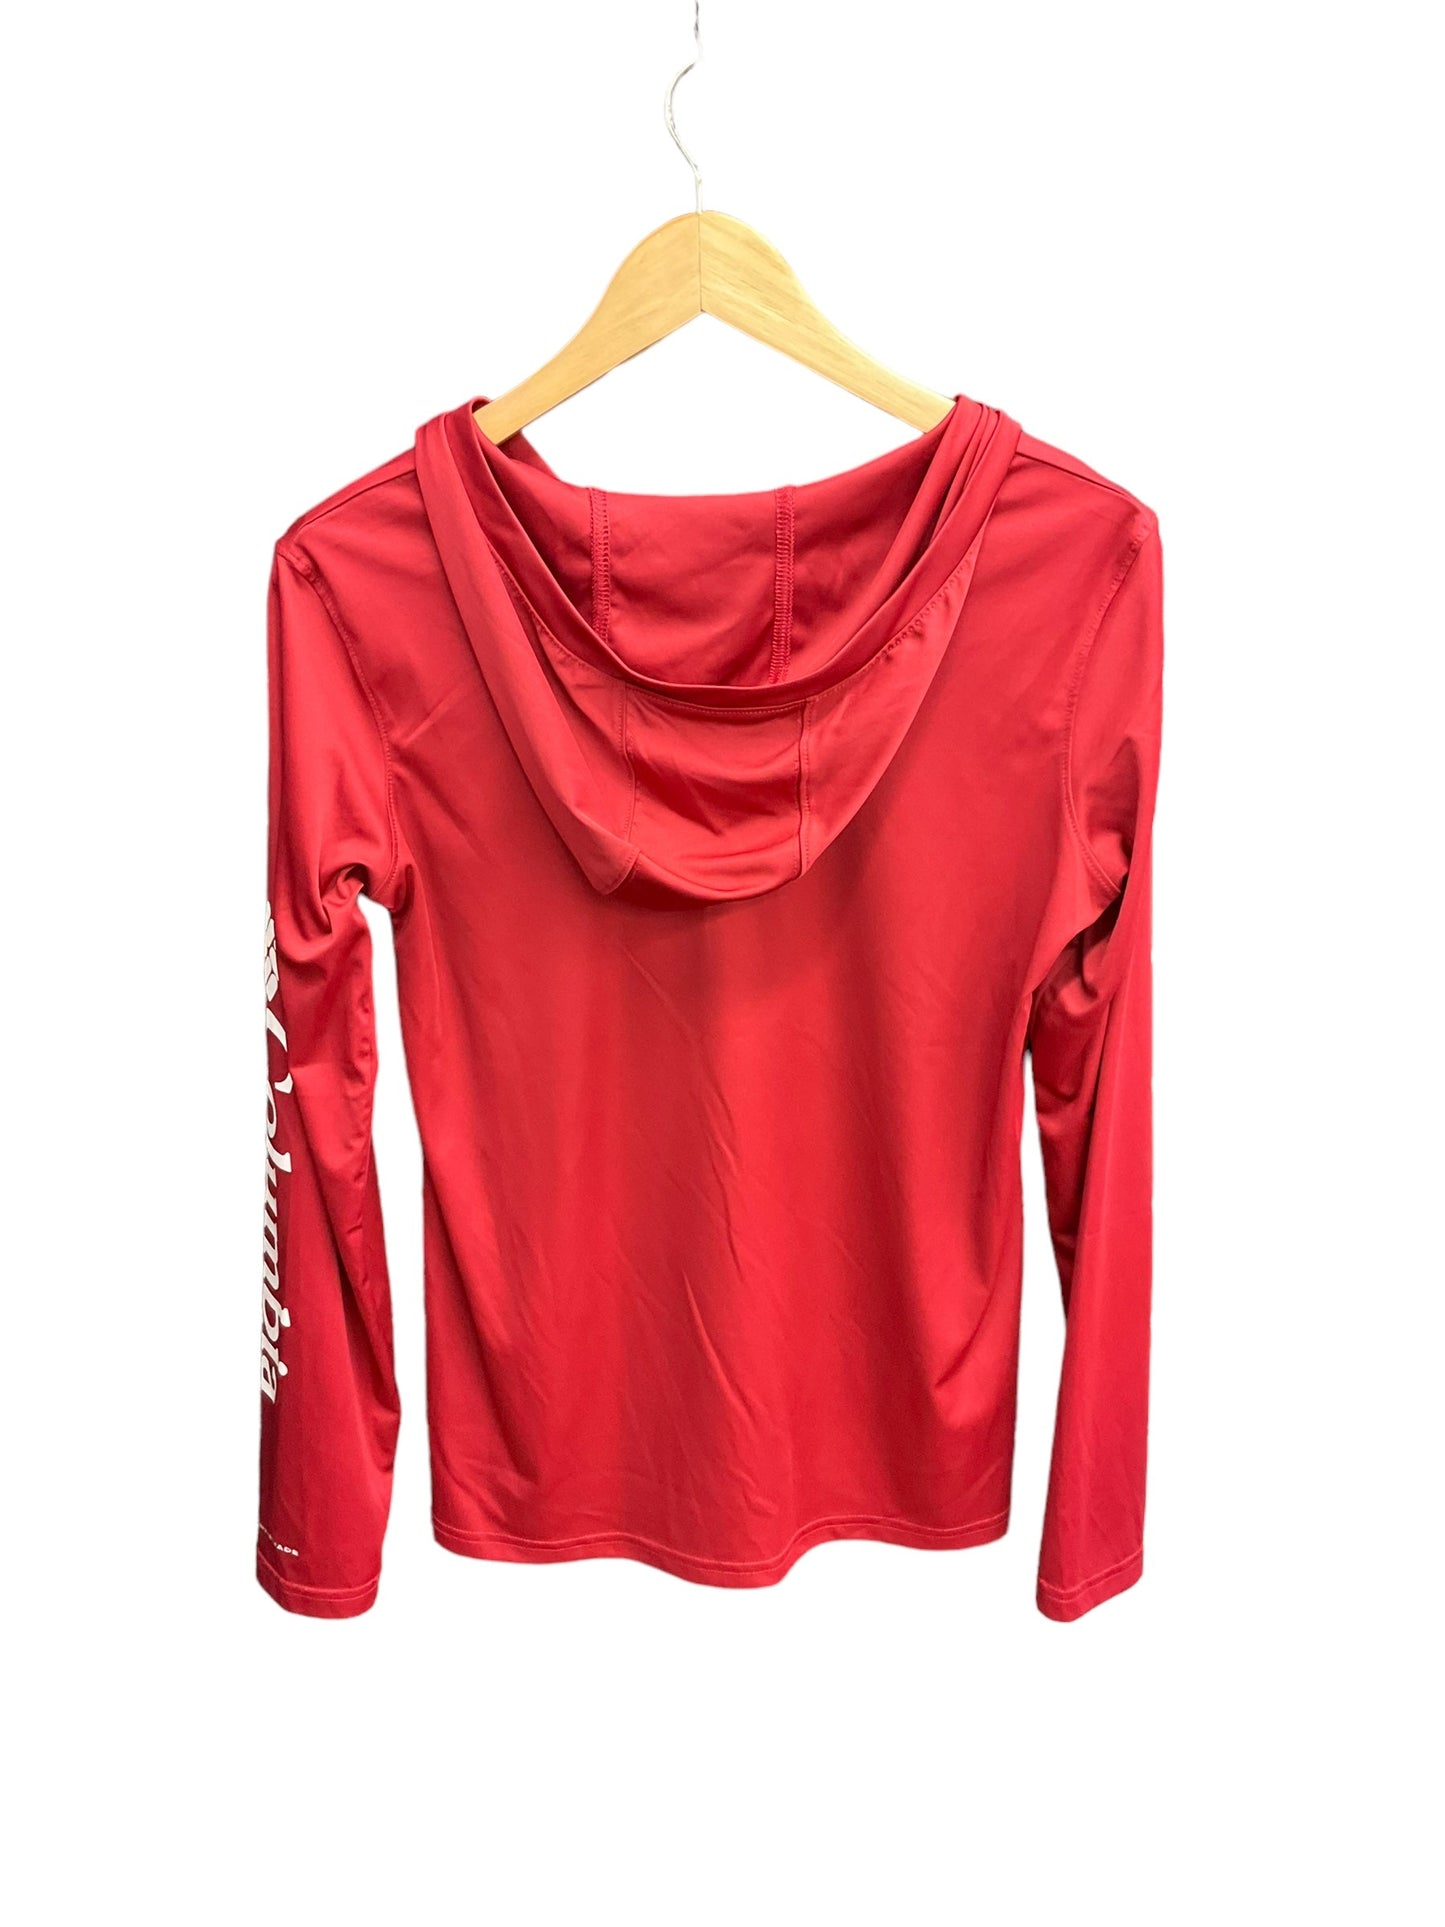 Red Athletic Top Long Sleeve Collar Columbia, Size M